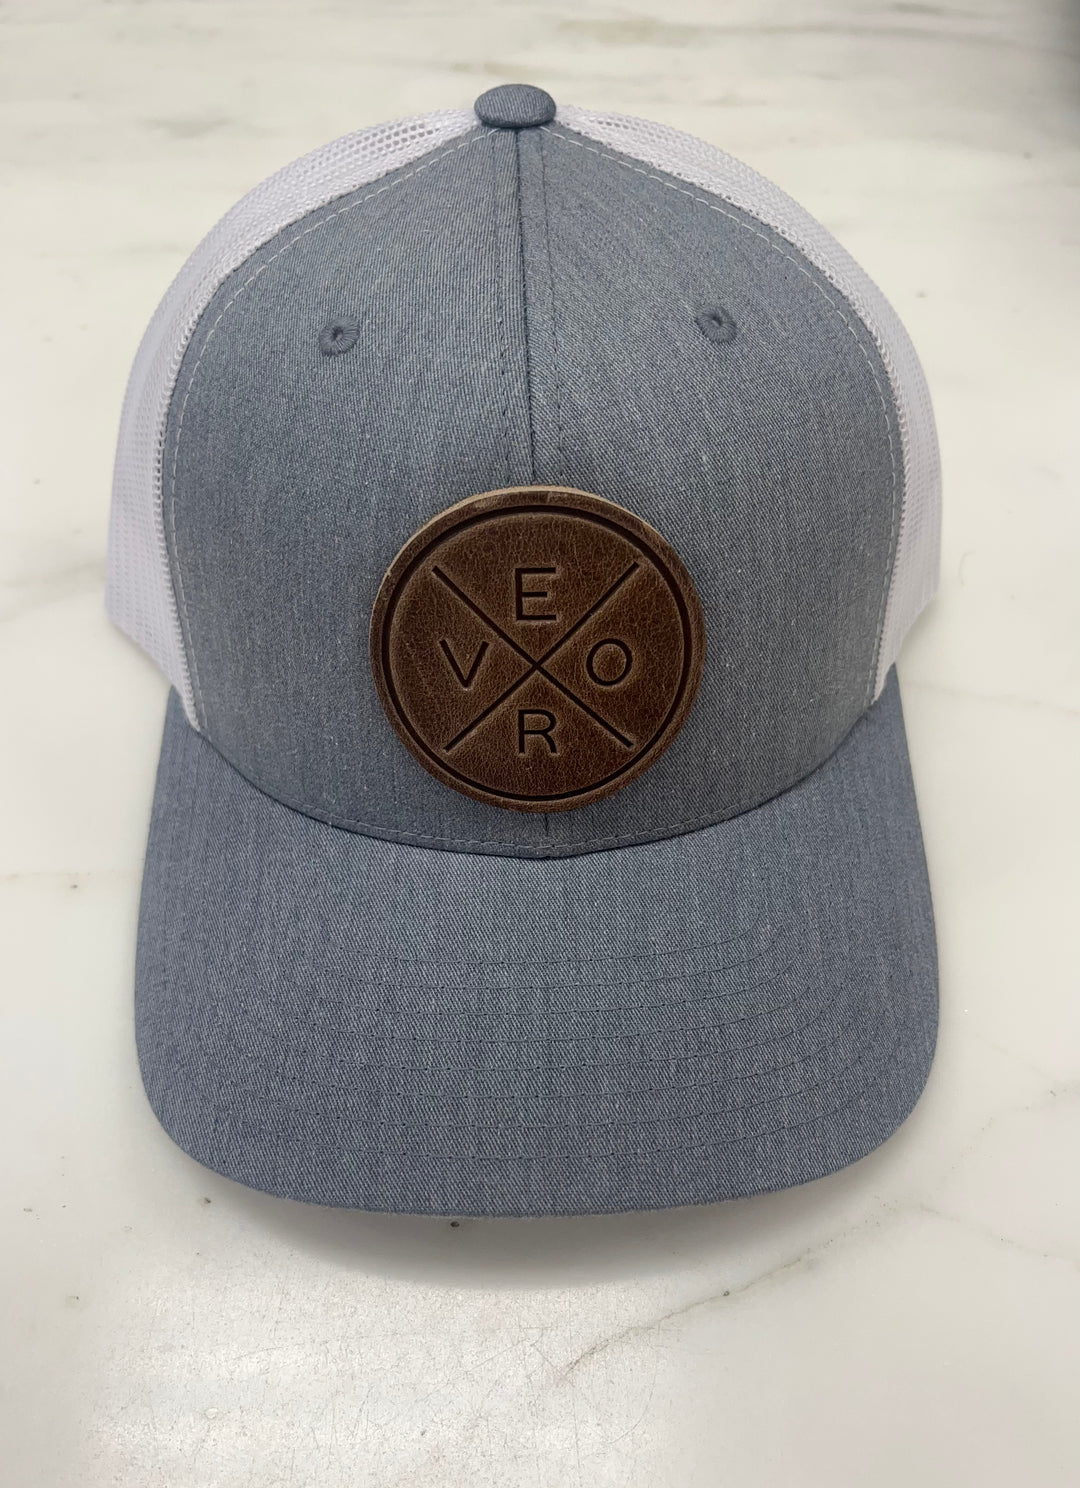 Vero Hat - Leather Patch Heather Grey + White